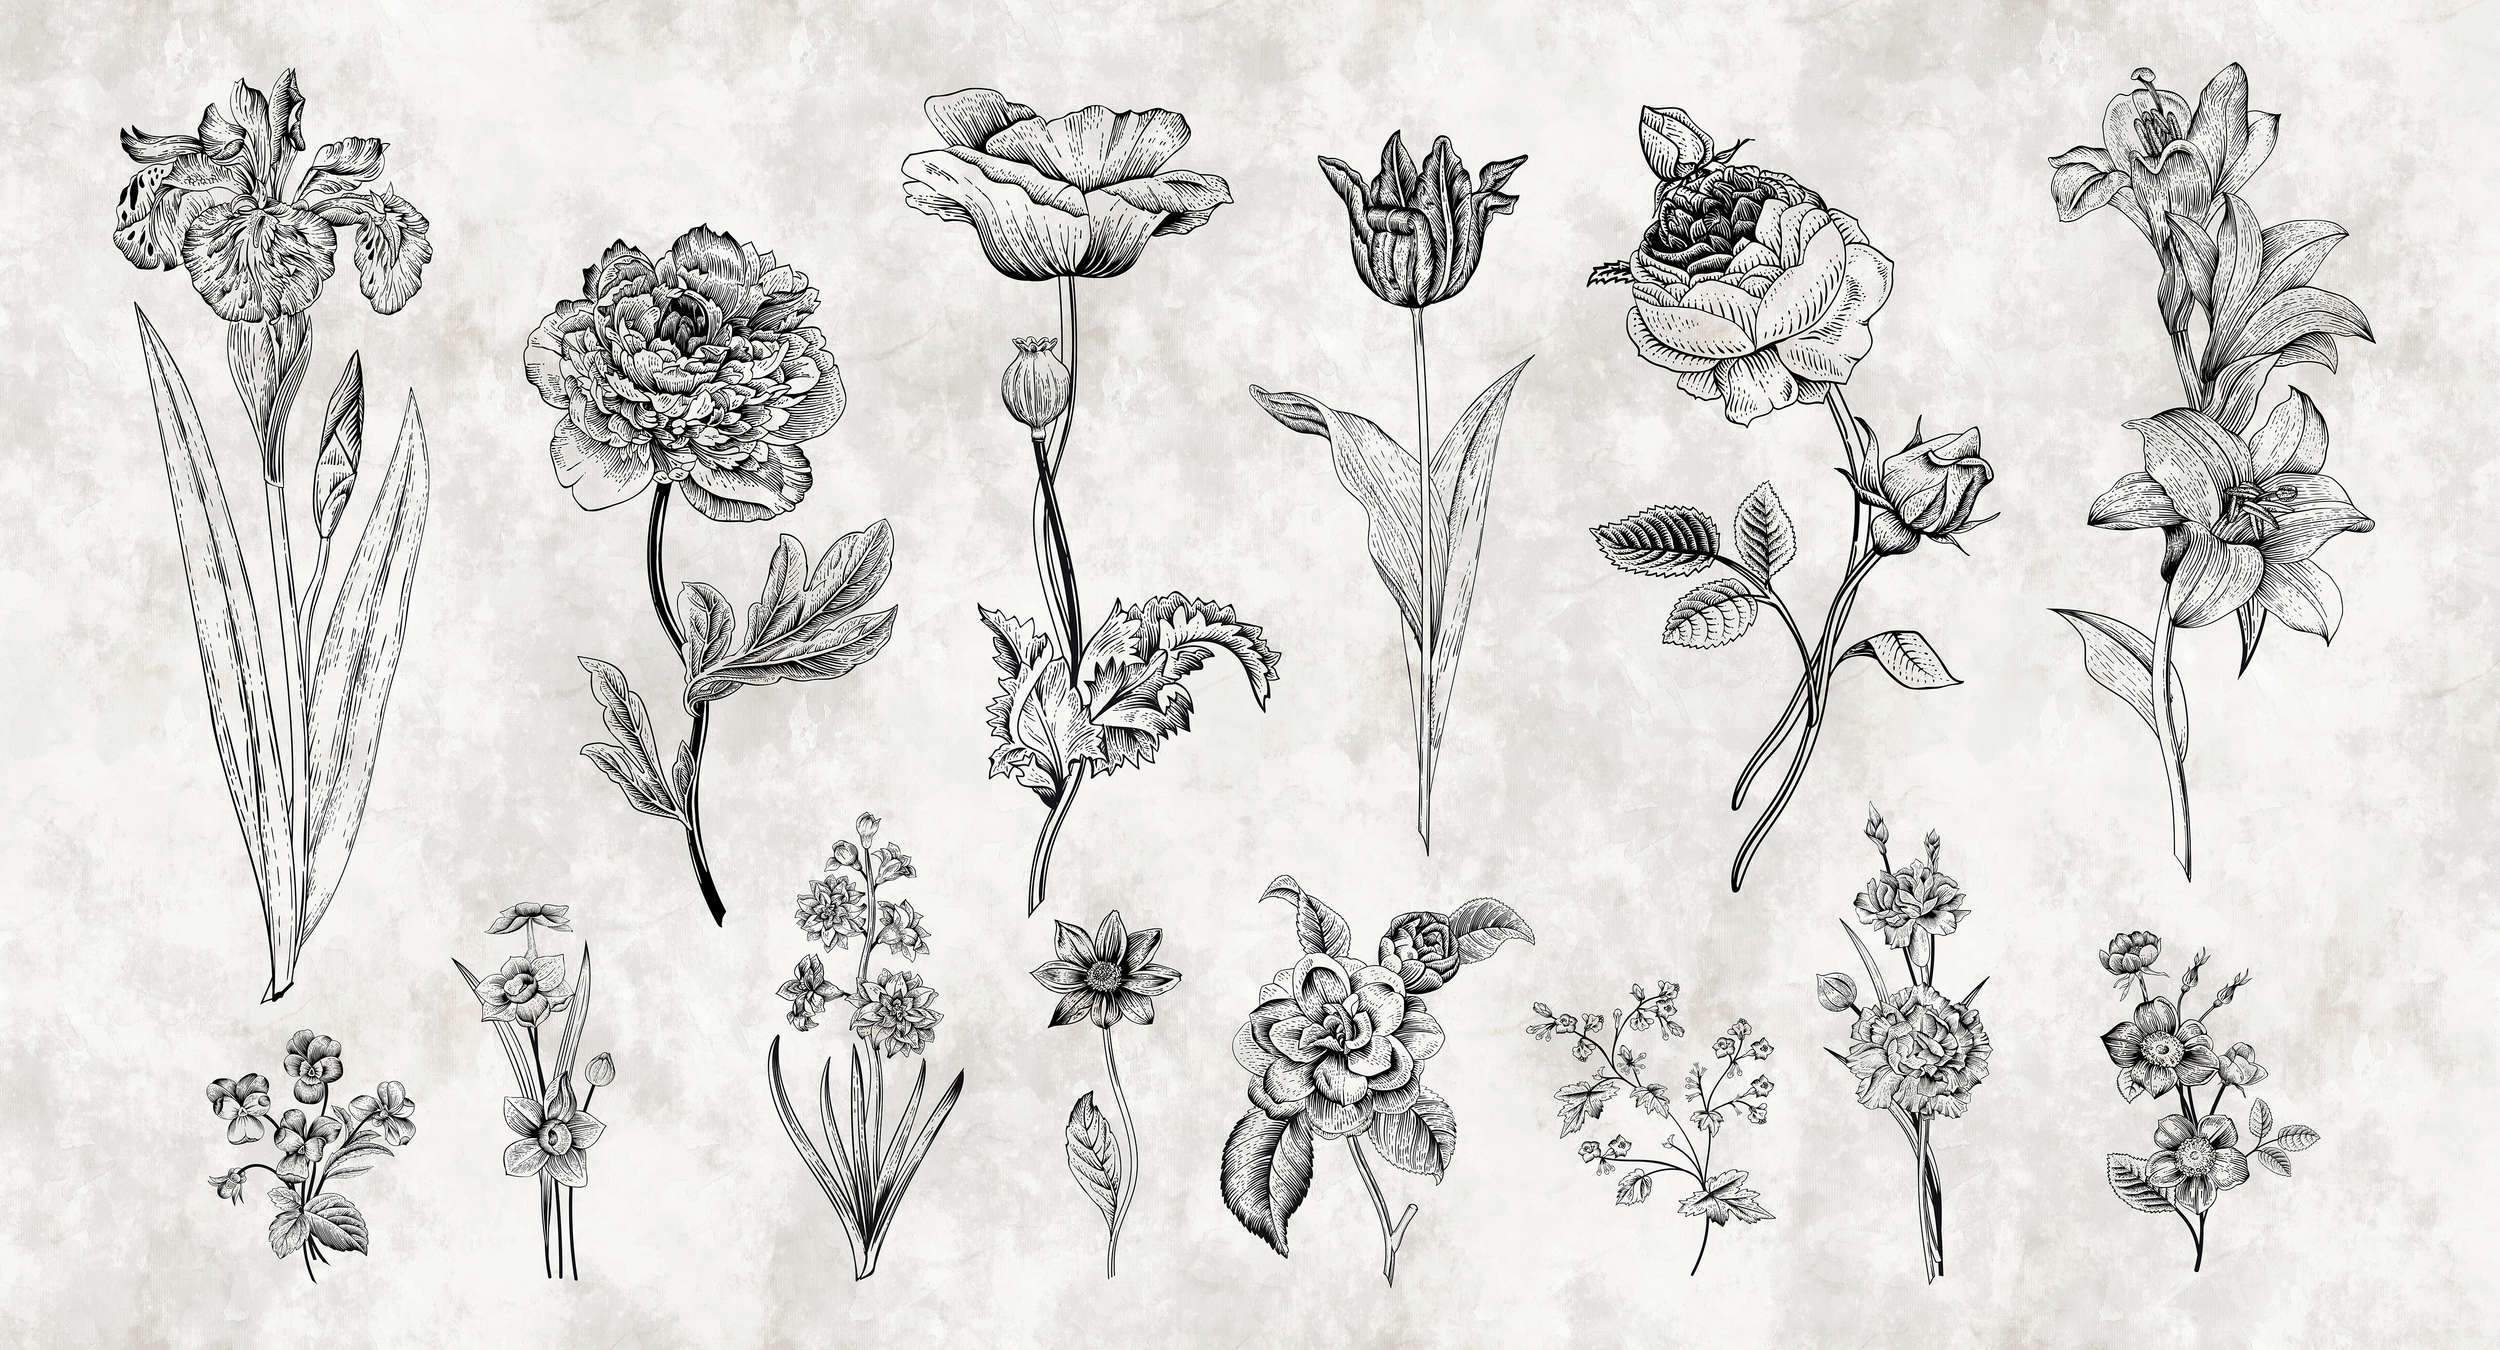             Photo wallpaper flowers in drawing style - white, black
        